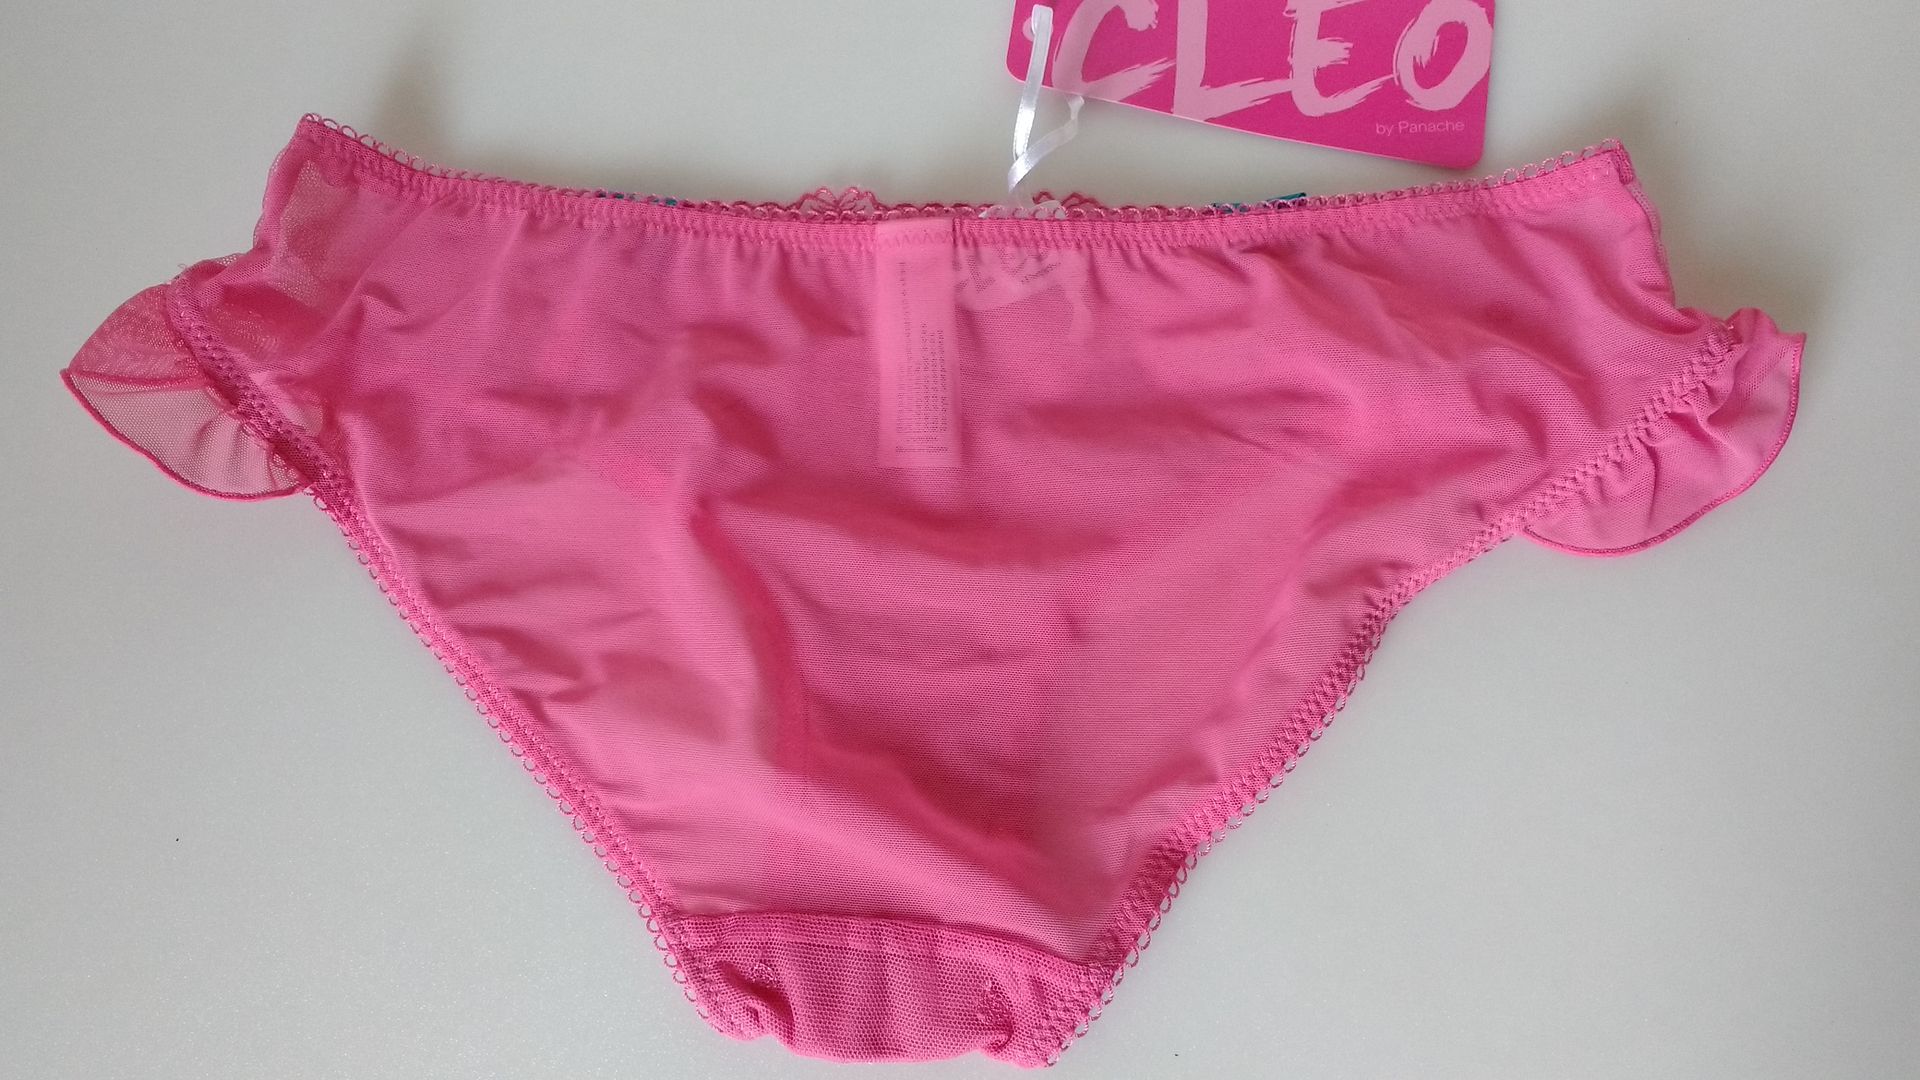 Candy Pink Low Rise Ruffle Cheeky Bikini Brief Panties Knickers Xl 16 Only One Ebay 7393